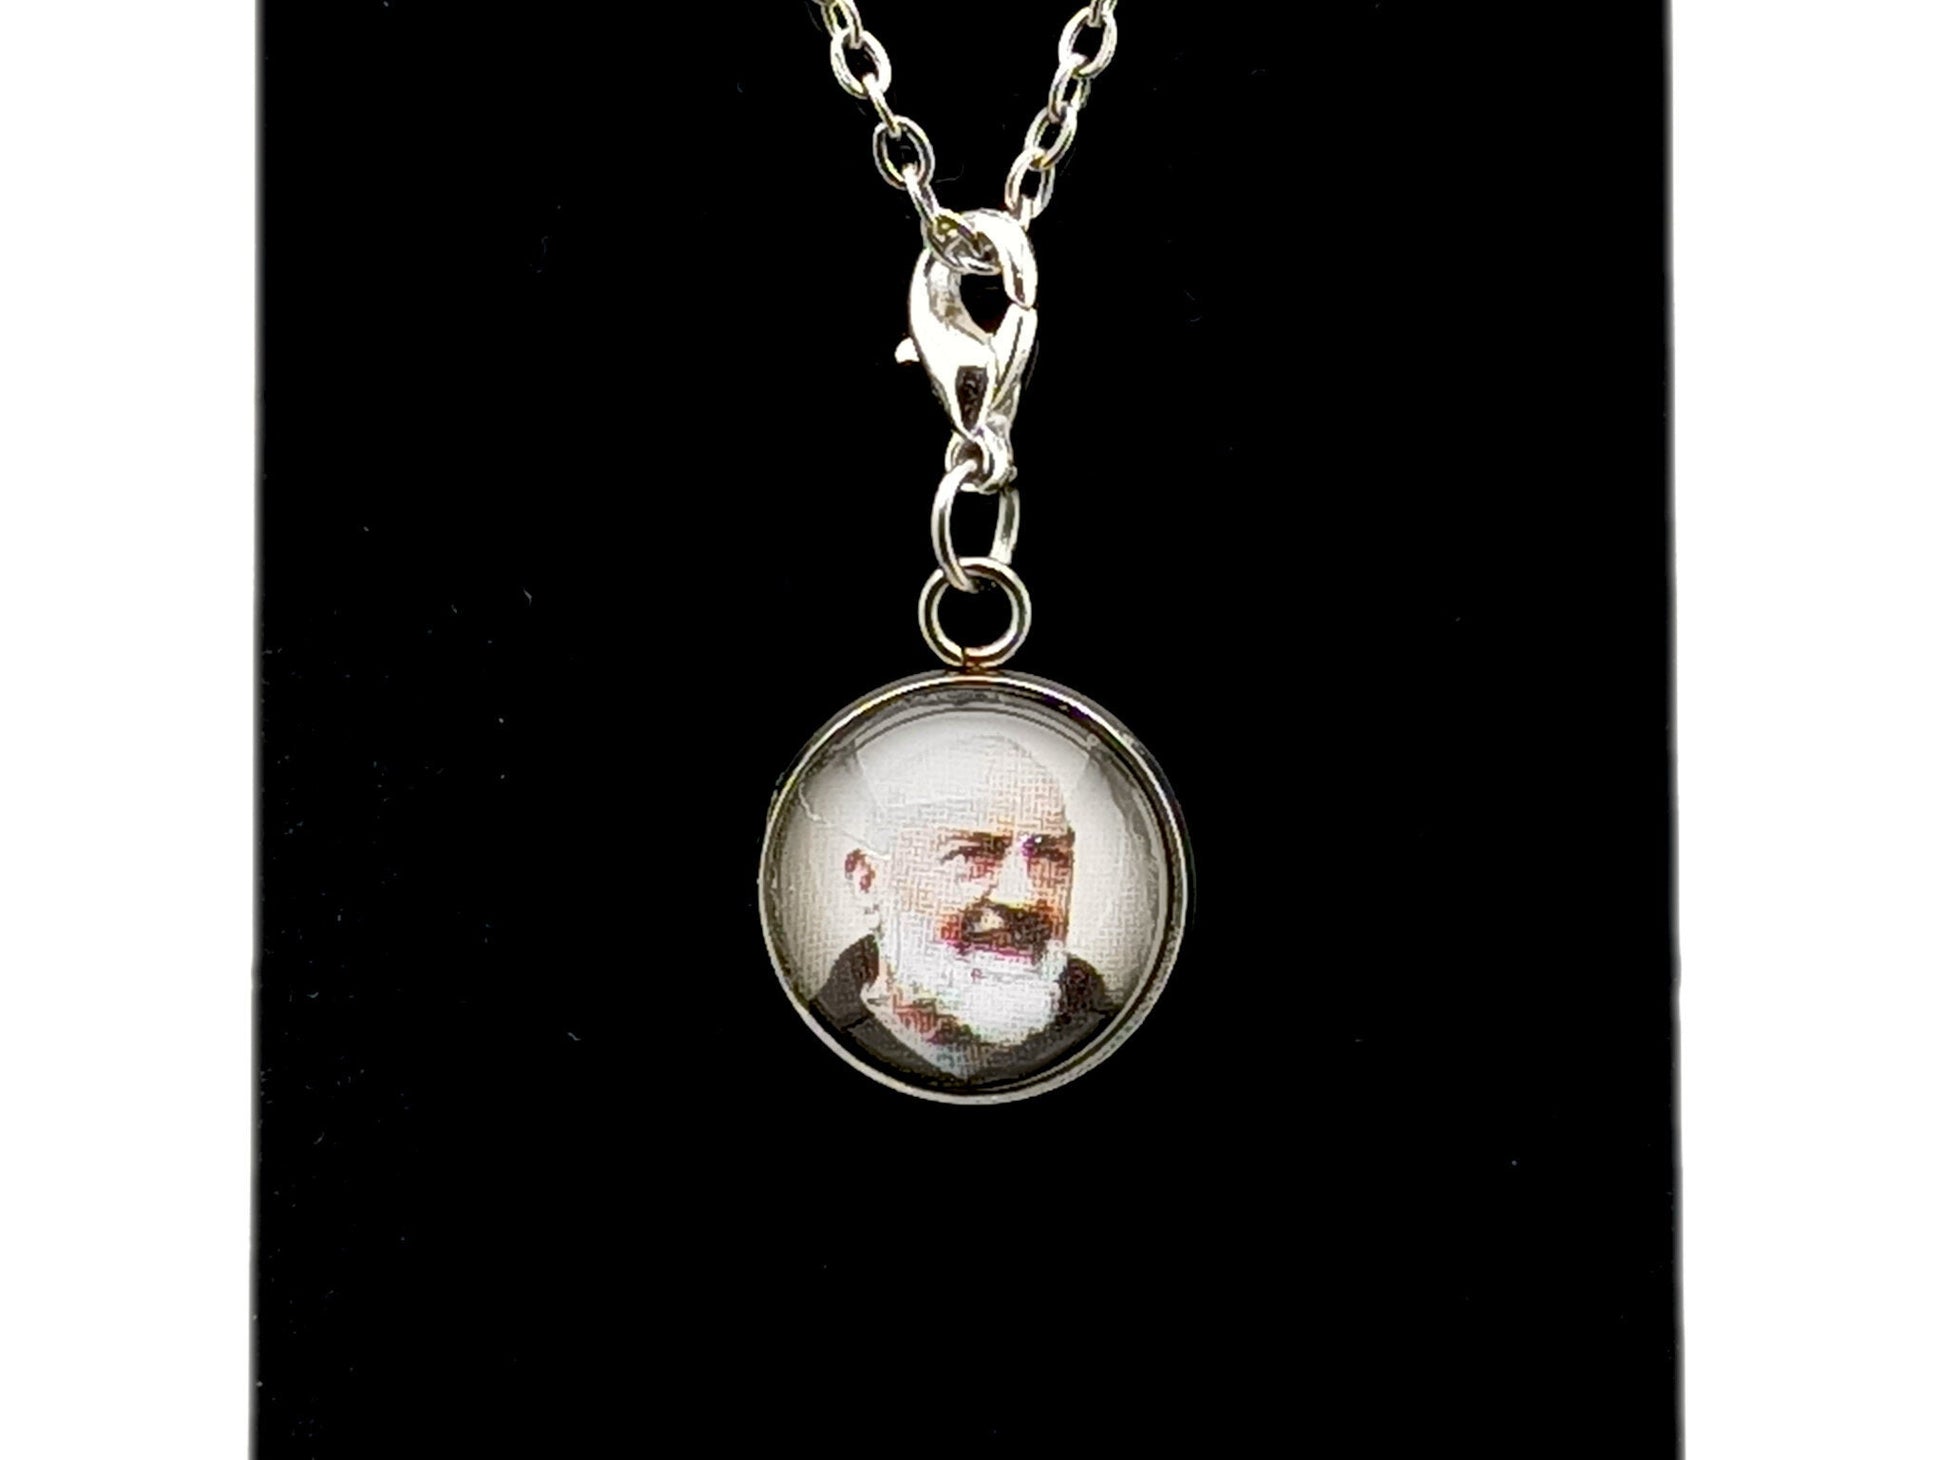 Saint Padre Pio unique rosary beads stainless steel picture medal with lobster clasp.